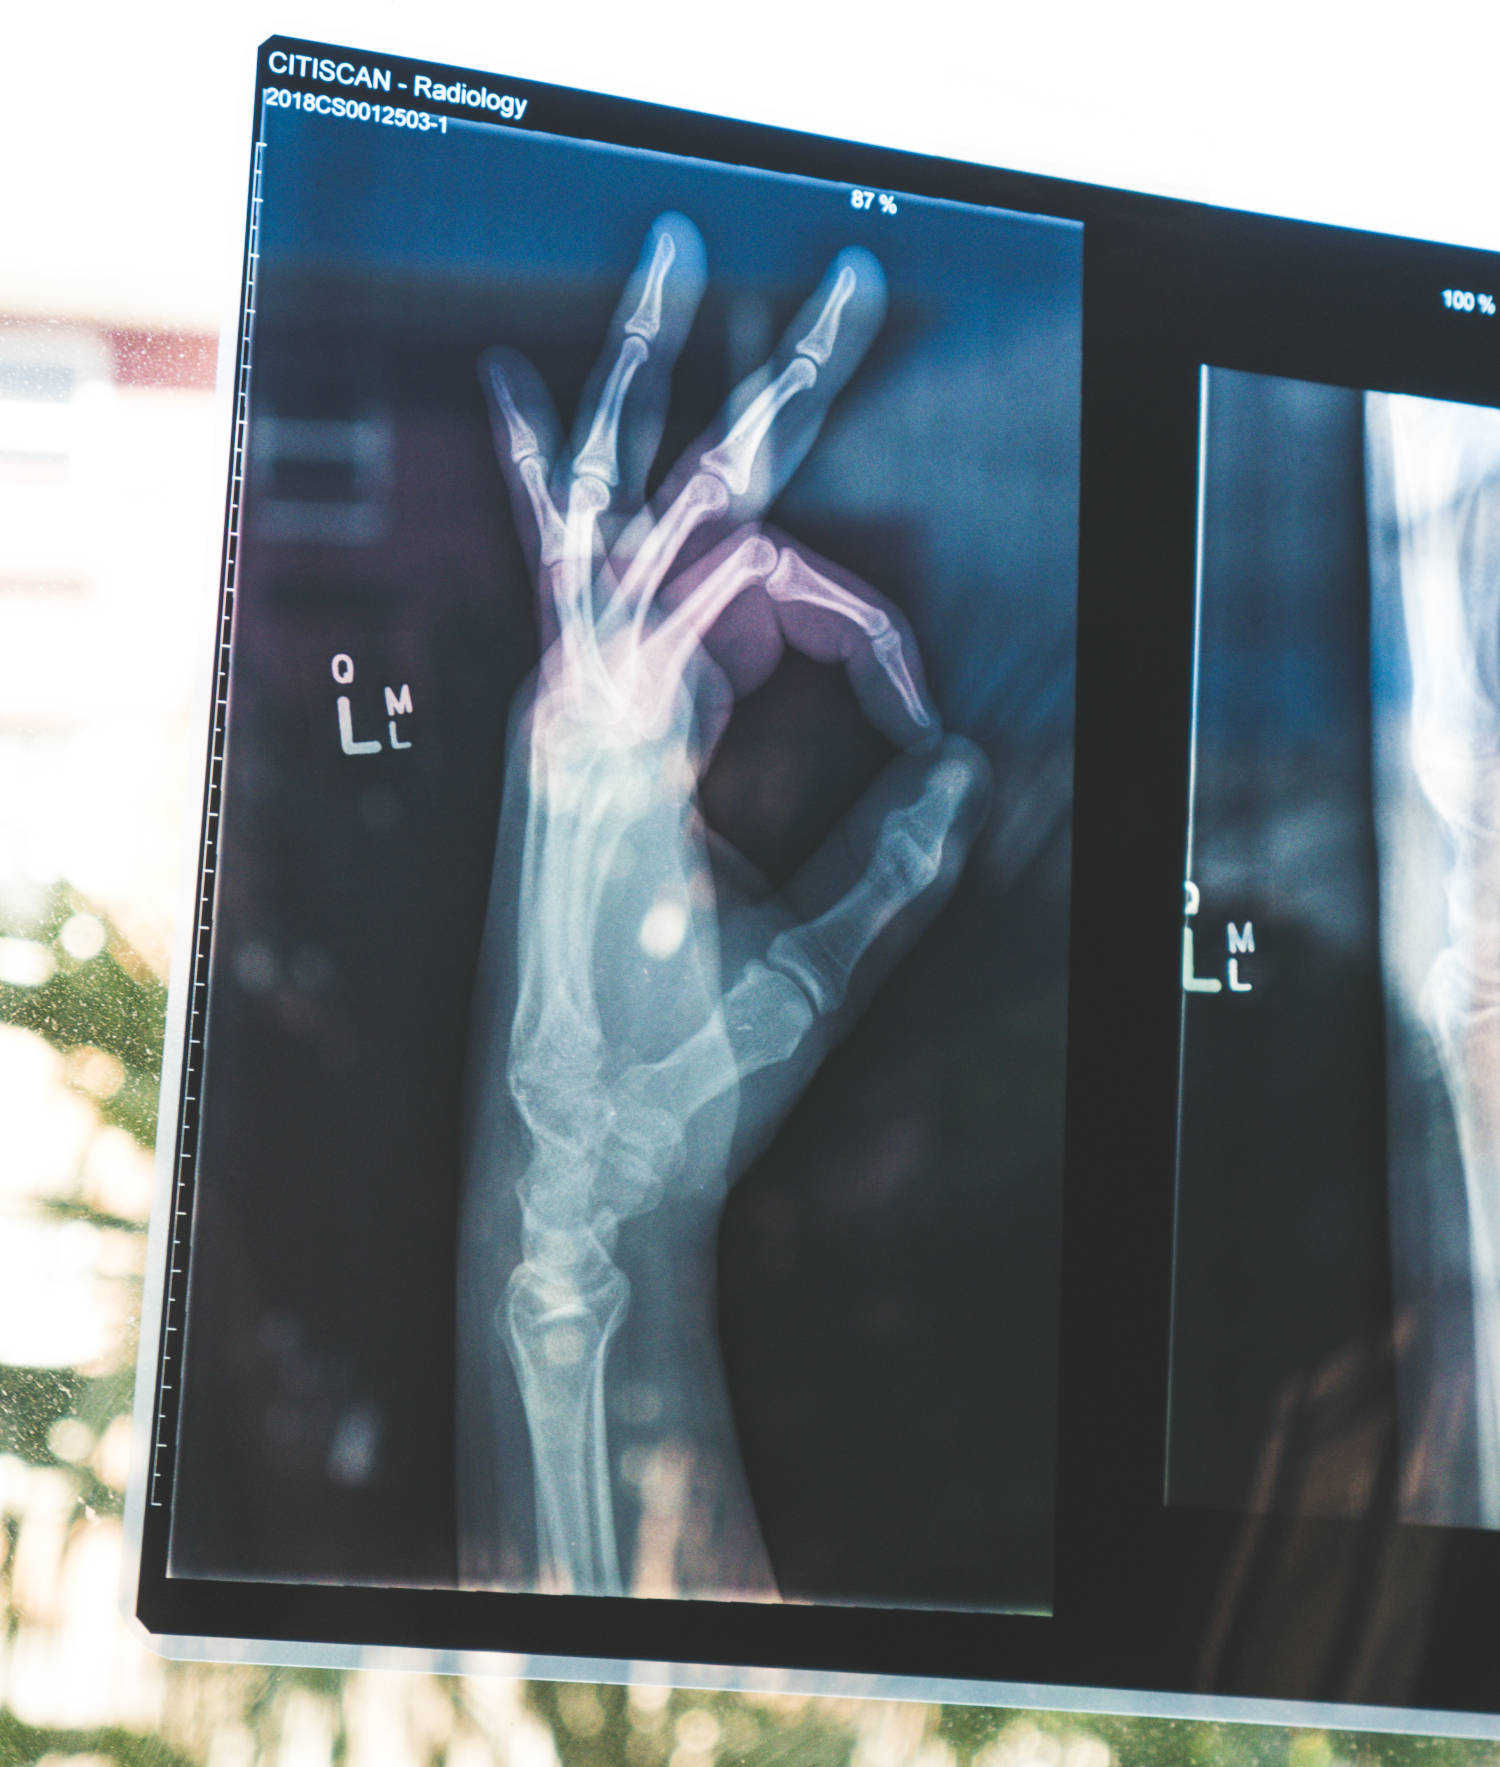 An x-ray image of a hand making an ok sign.